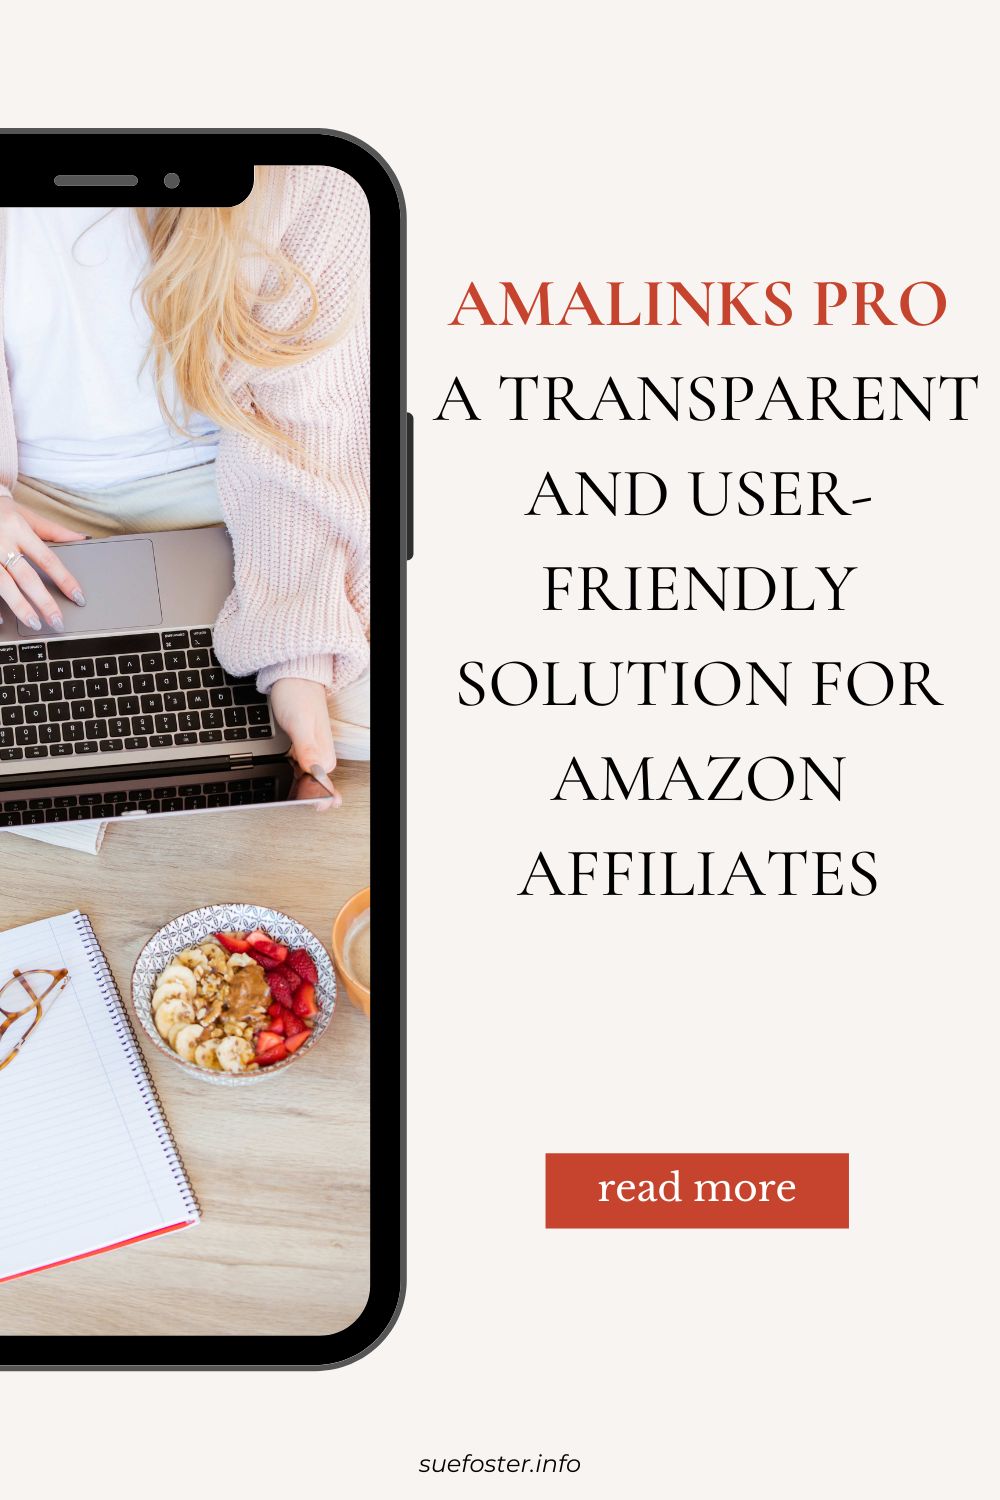 Increase your Amazon affiliate earnings with AmaLinks Pro, a WordPress plugin packed with features to convert plain text and image links into clickable content.